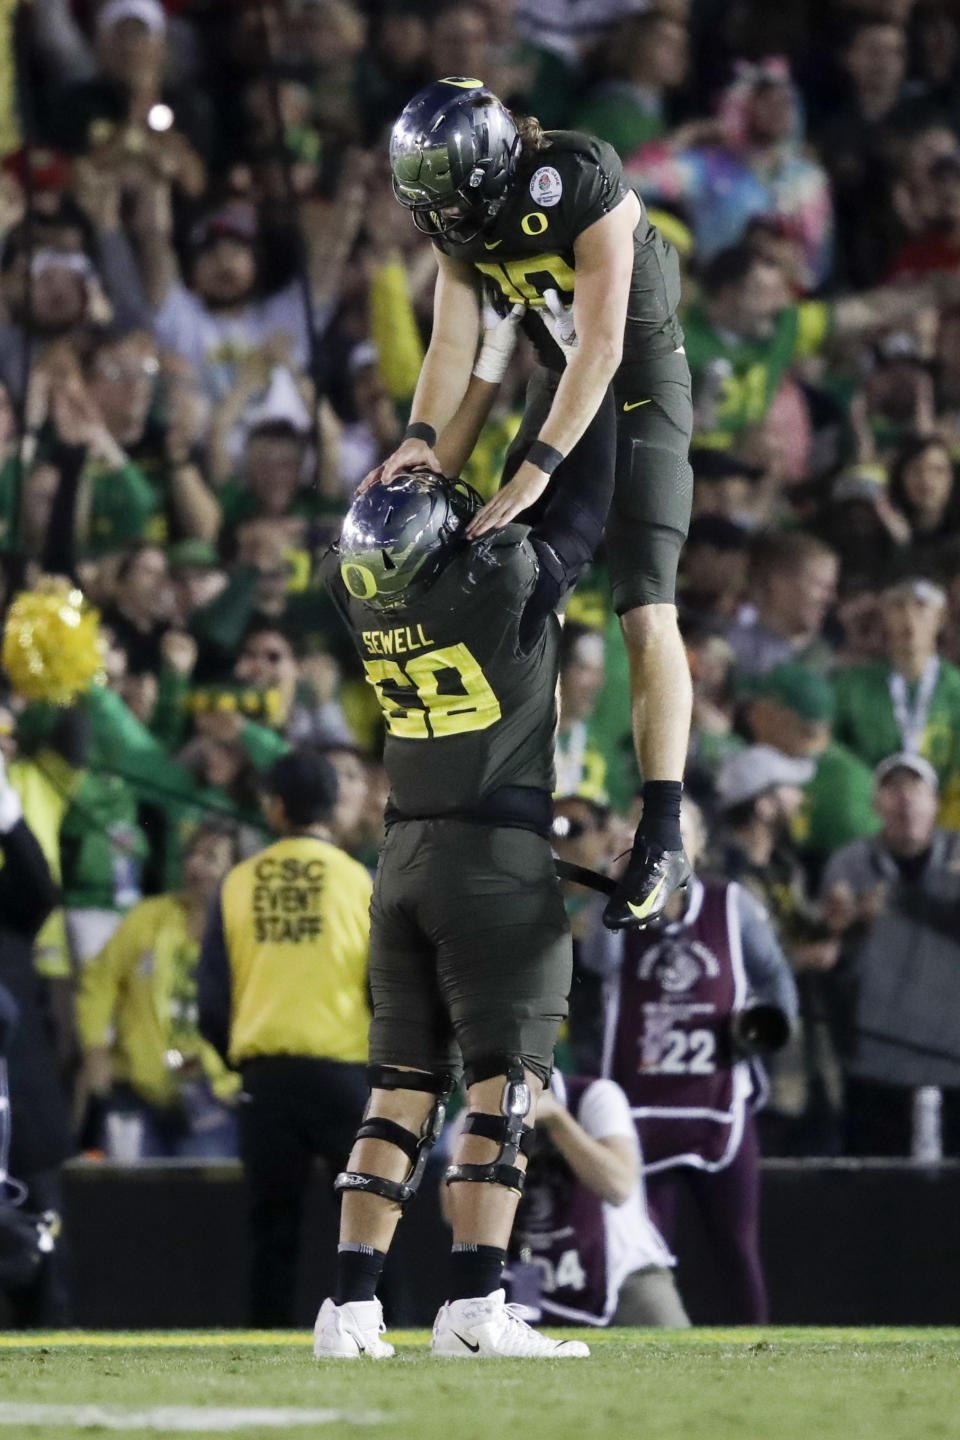 Oregon quarterback Justin Herbert celebrates after scoring with offensive lineman Penei Sewell during second half of the Rose Bowl NCAA college football game against Wisconsin Wednesday, Jan. 1, 2020, in Pasadena, Calif. (AP Photo/Marcio Jose Sanchez)